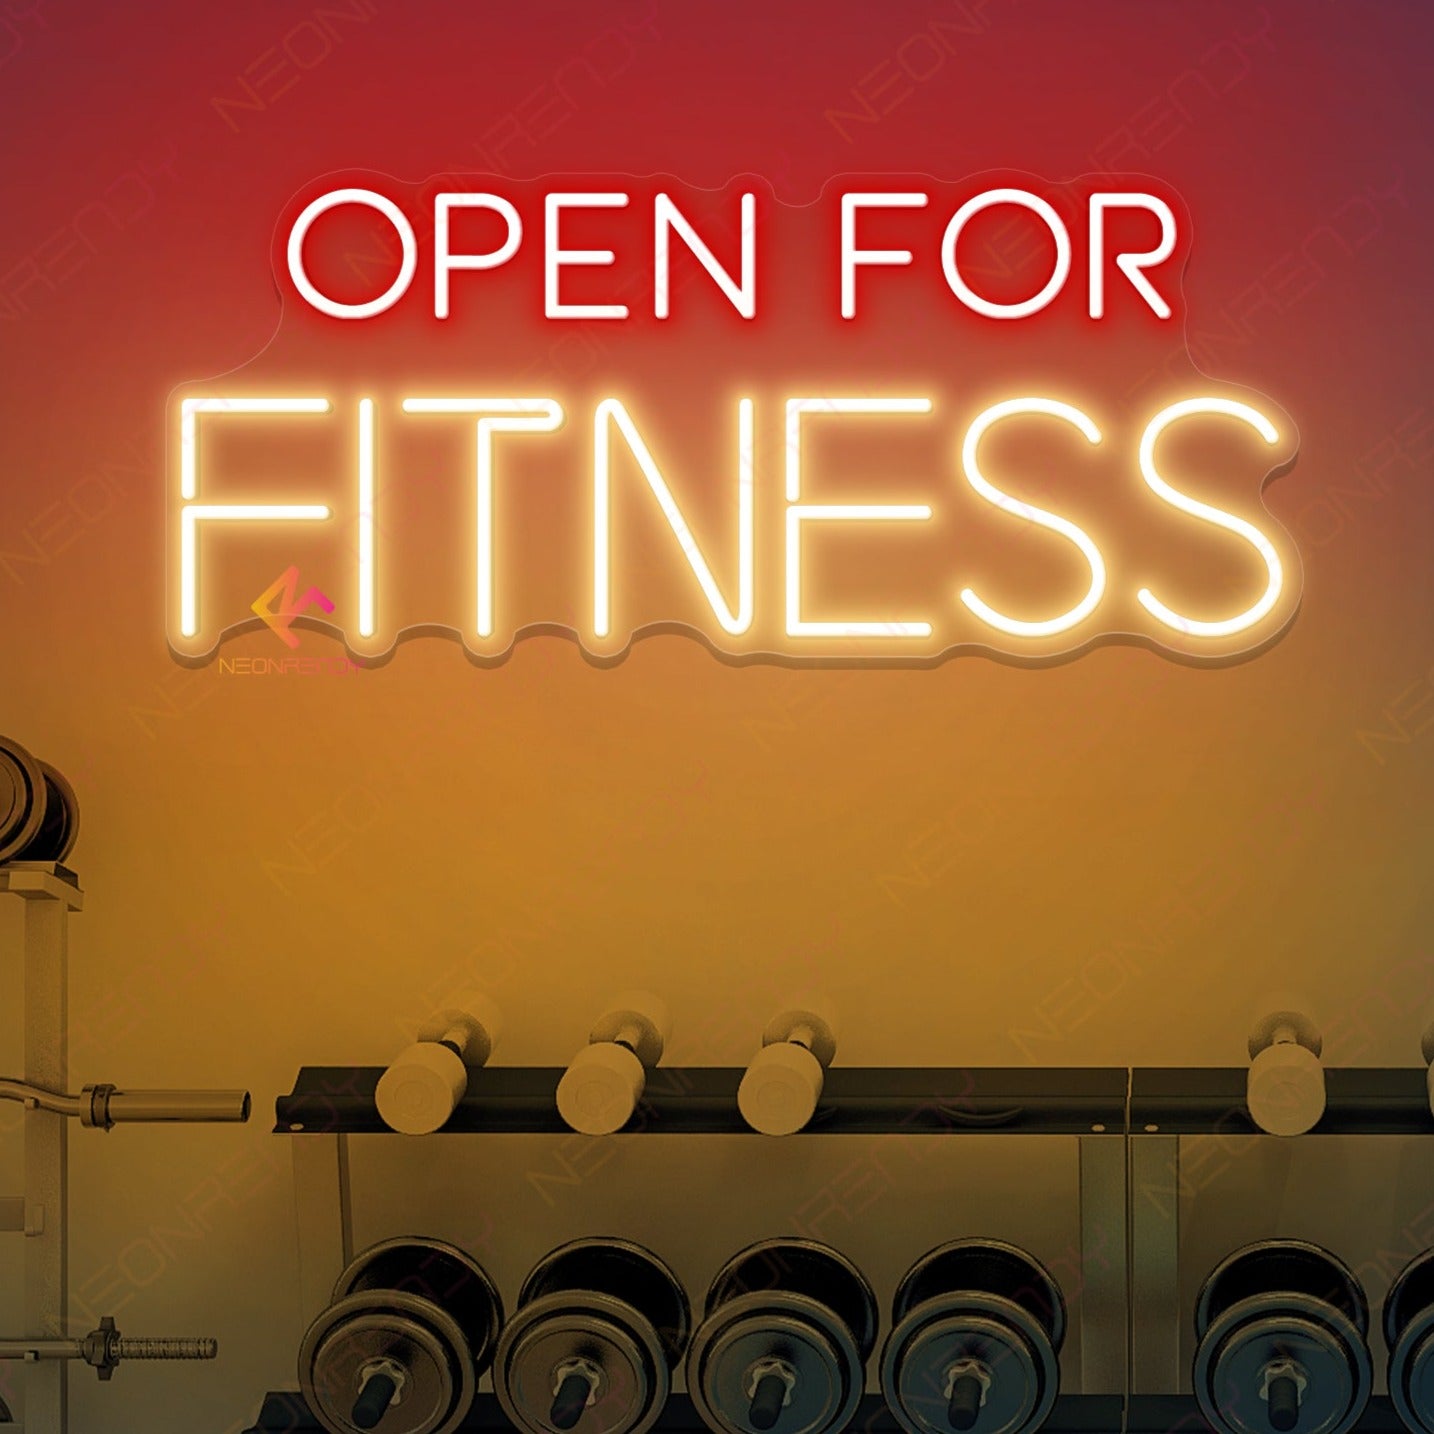 Open For Fitness Neon Sign Gym Led Light red